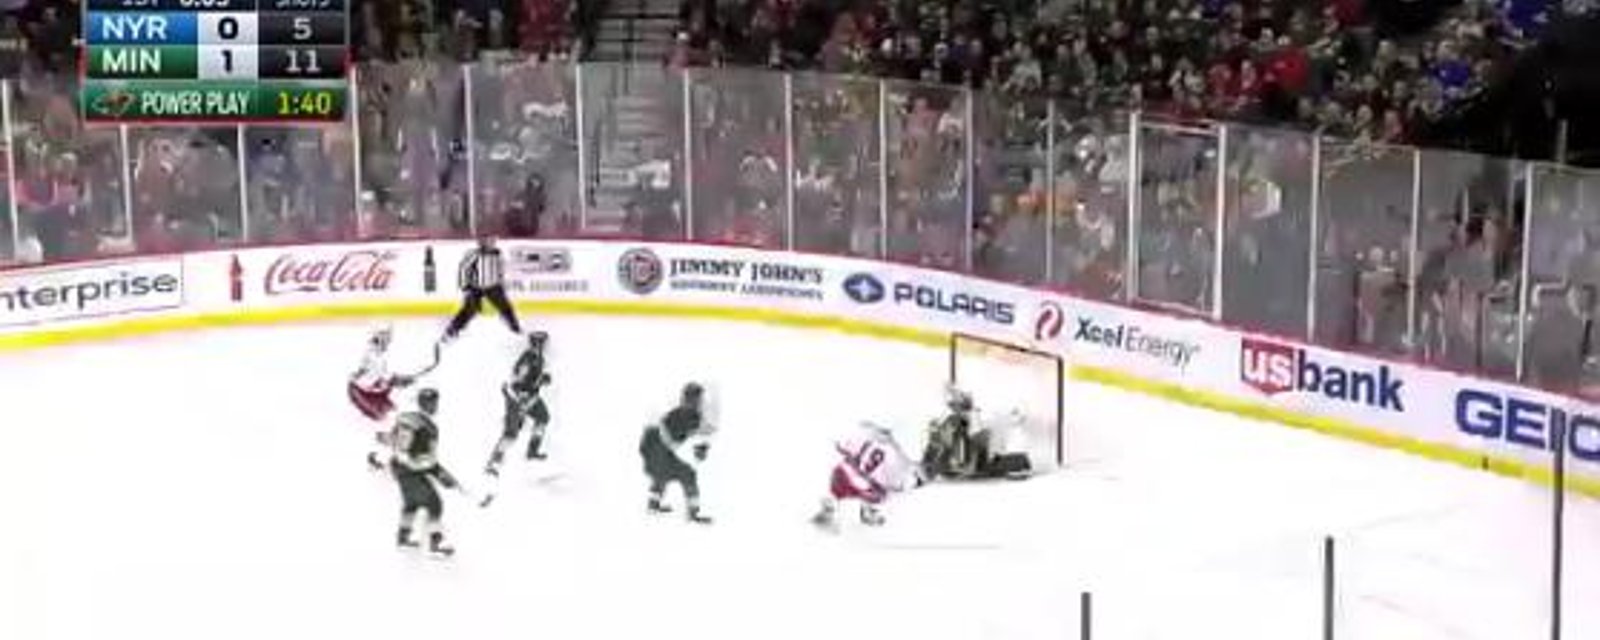 Dubnyk makes an absolutely insane save. 